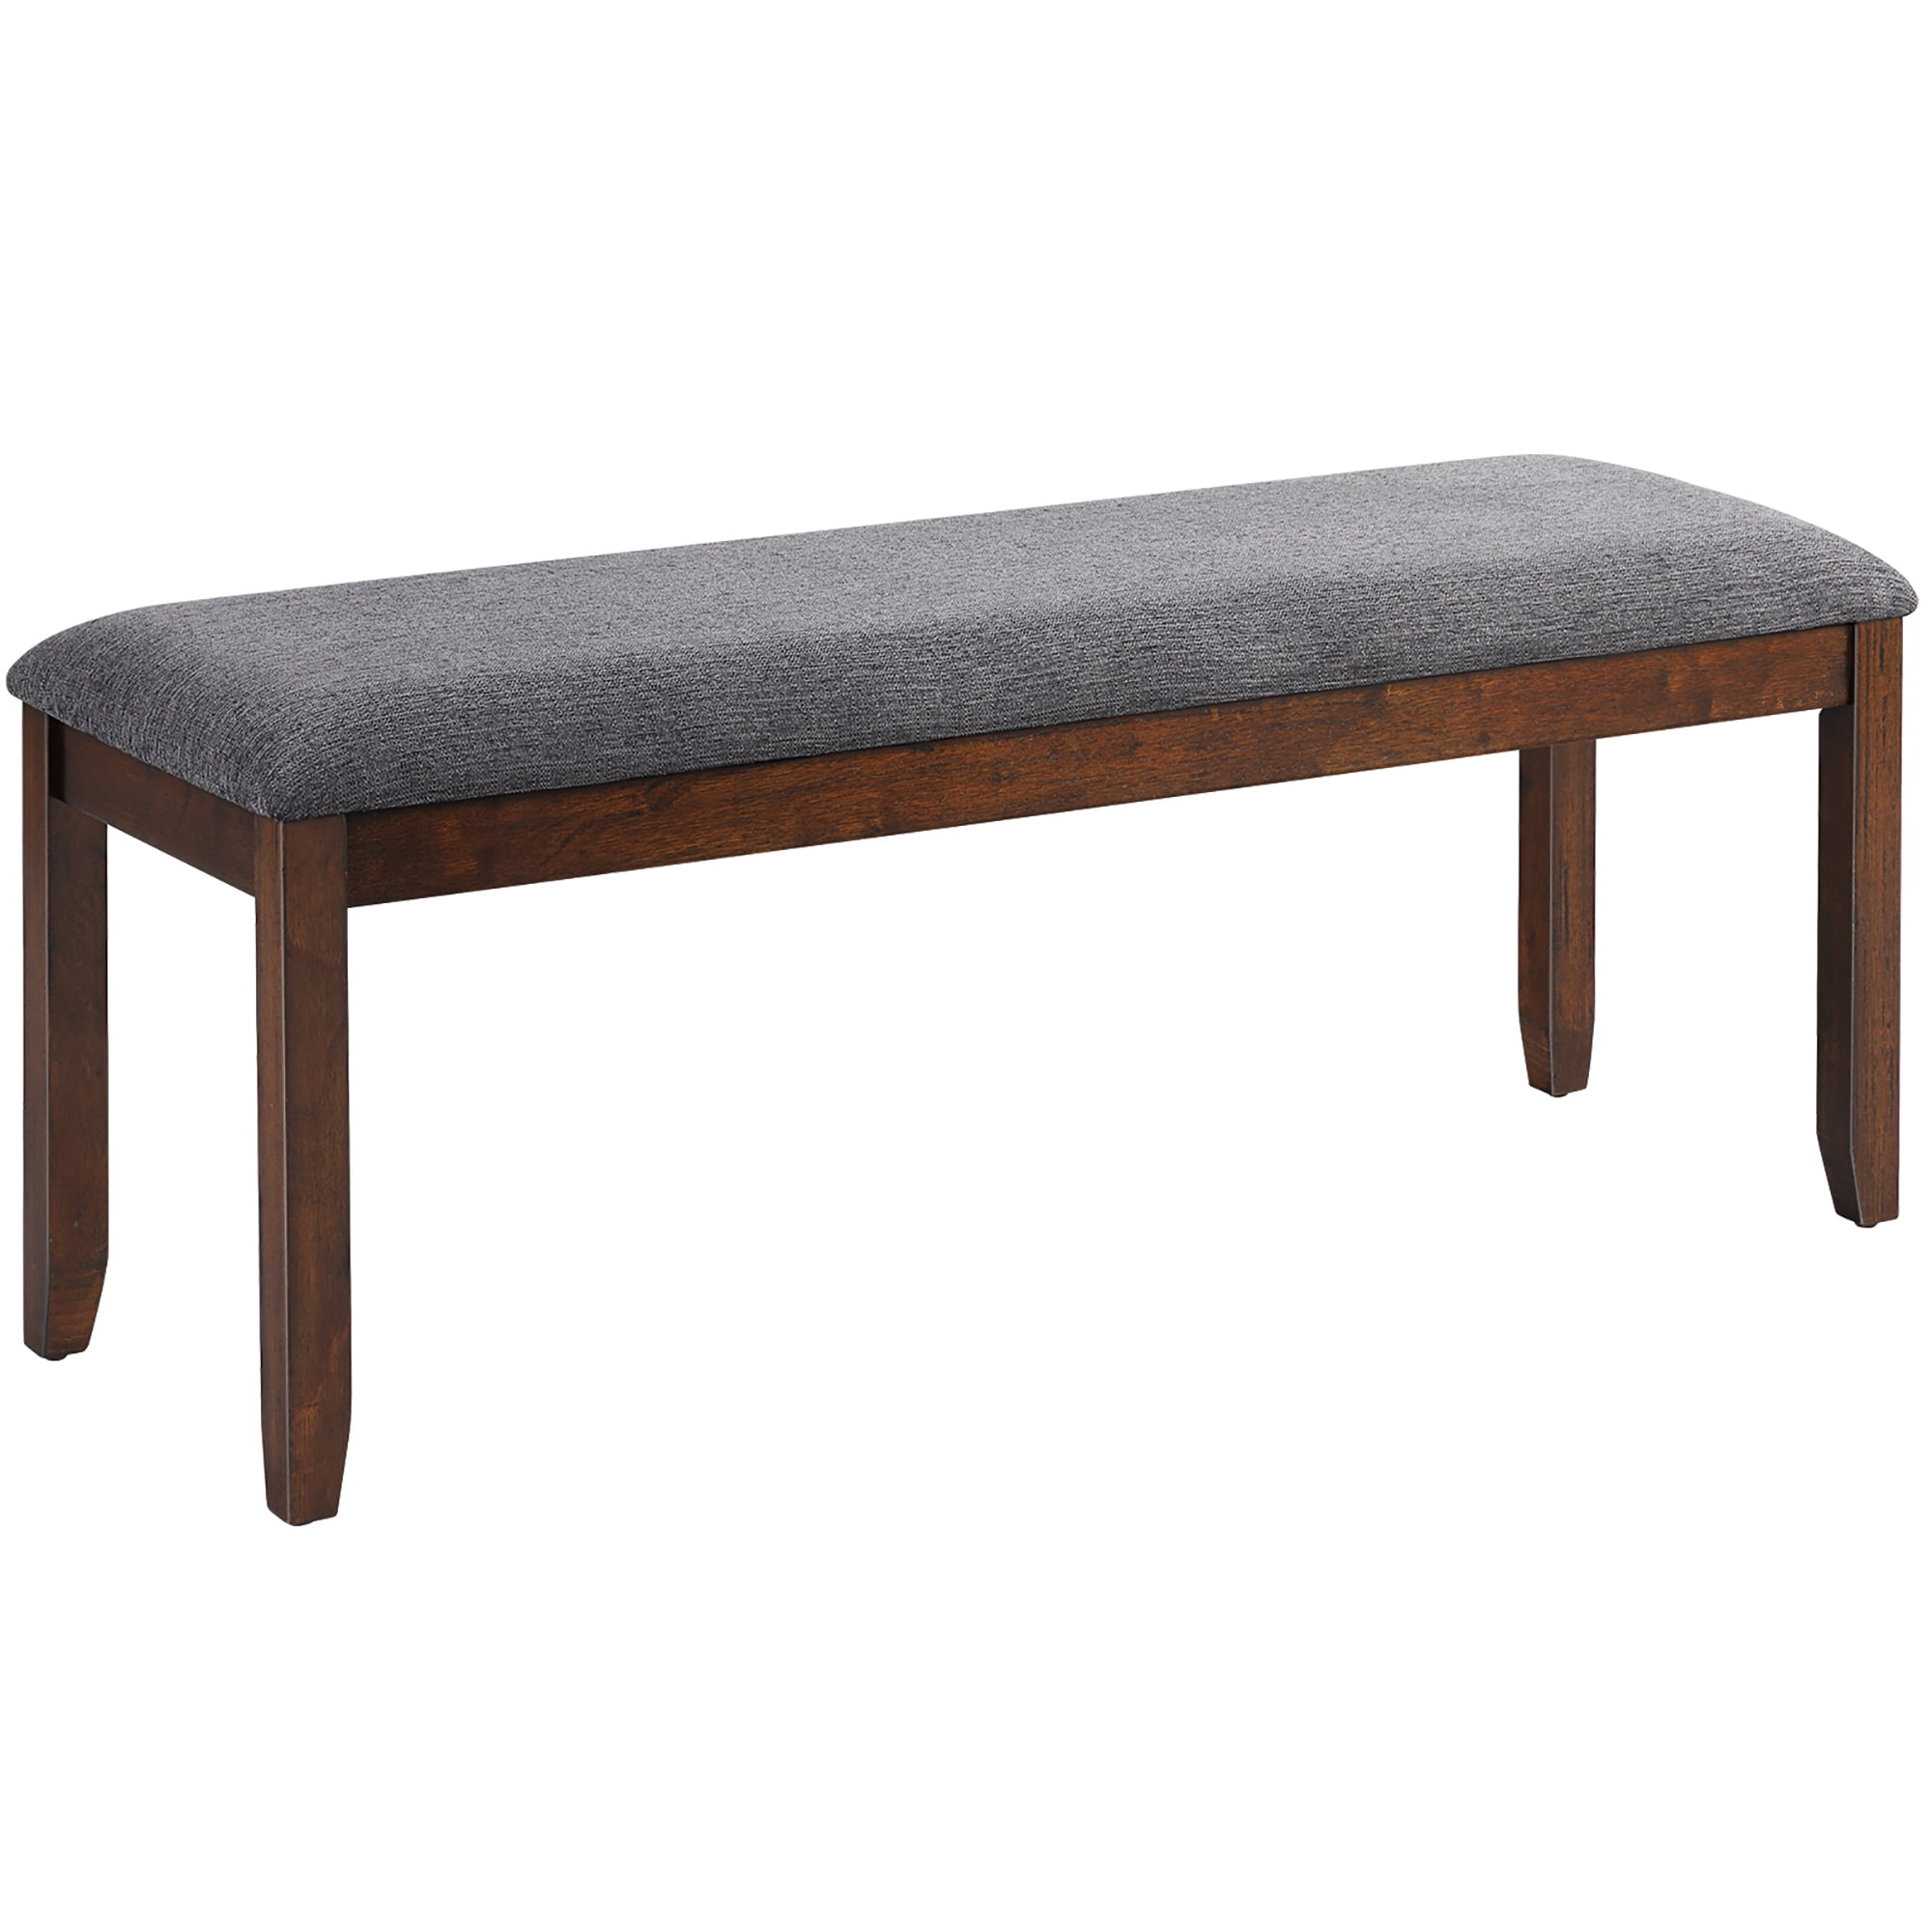 Living Room Bedroom 42.5 x 12.8 x 18.9 Inches Steel Frame VASAGLE Upholstered Dining Table Bench Ottoman Bench with PU Leather Padded Seat Brown and Black UKTB034B82 Hallway for Dining Room